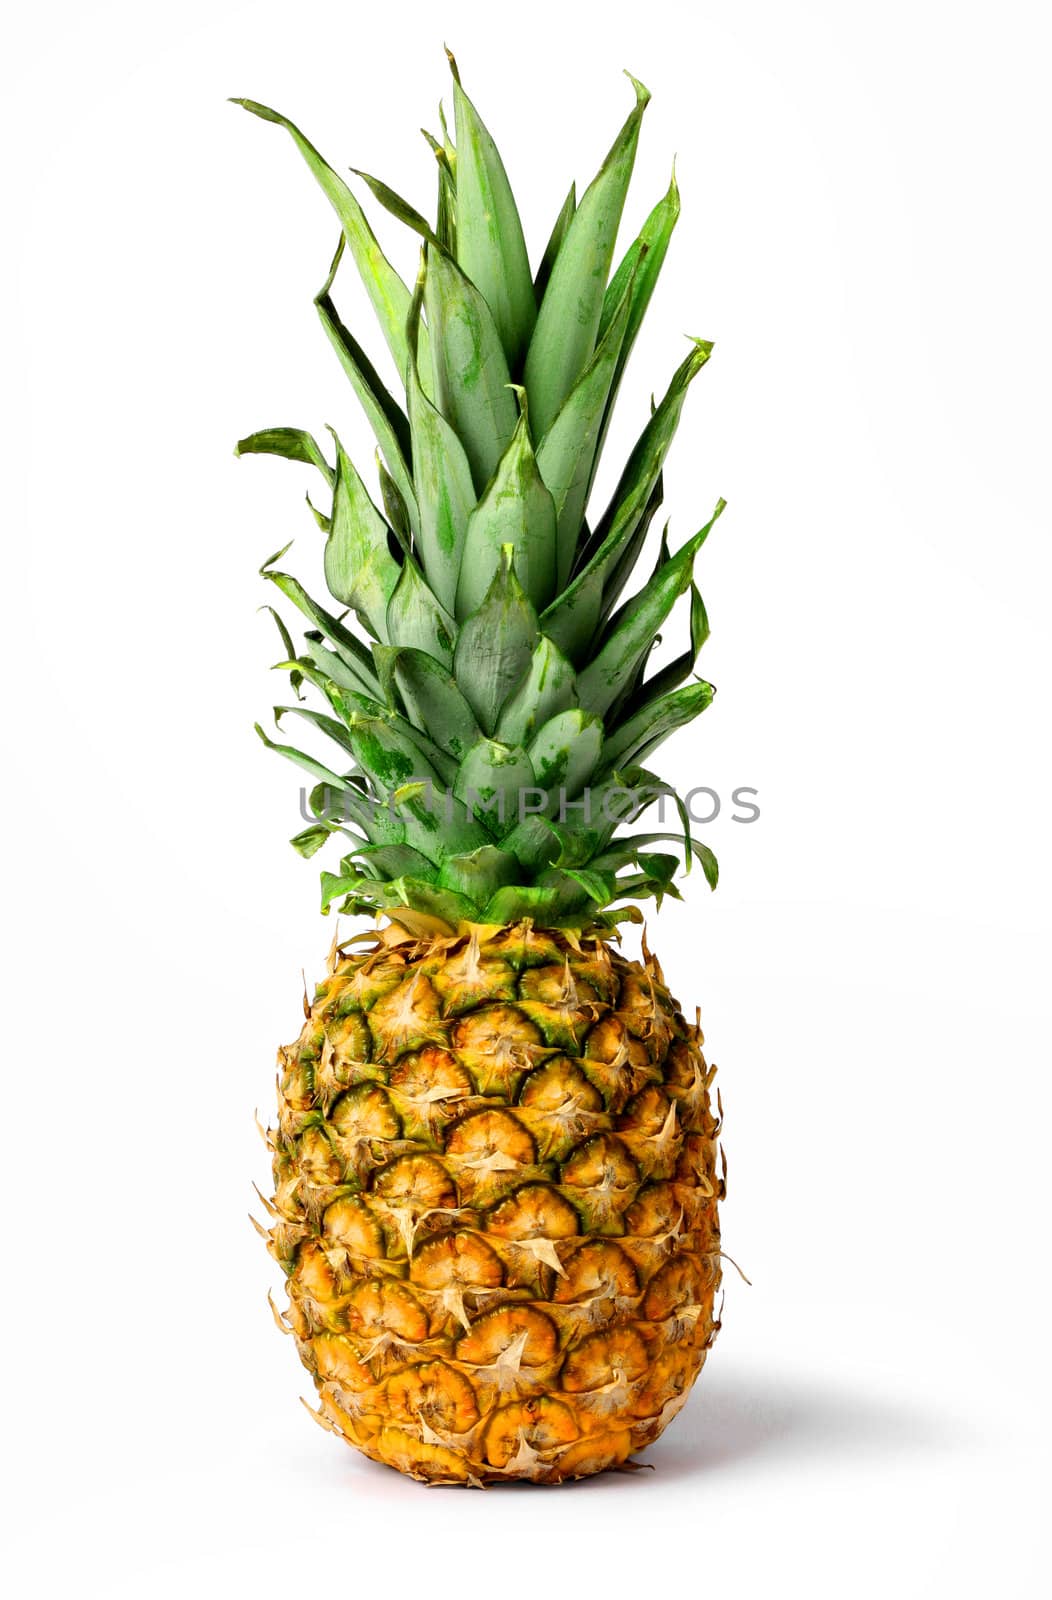 Fresh tropical pineapple fruit isolated on white background